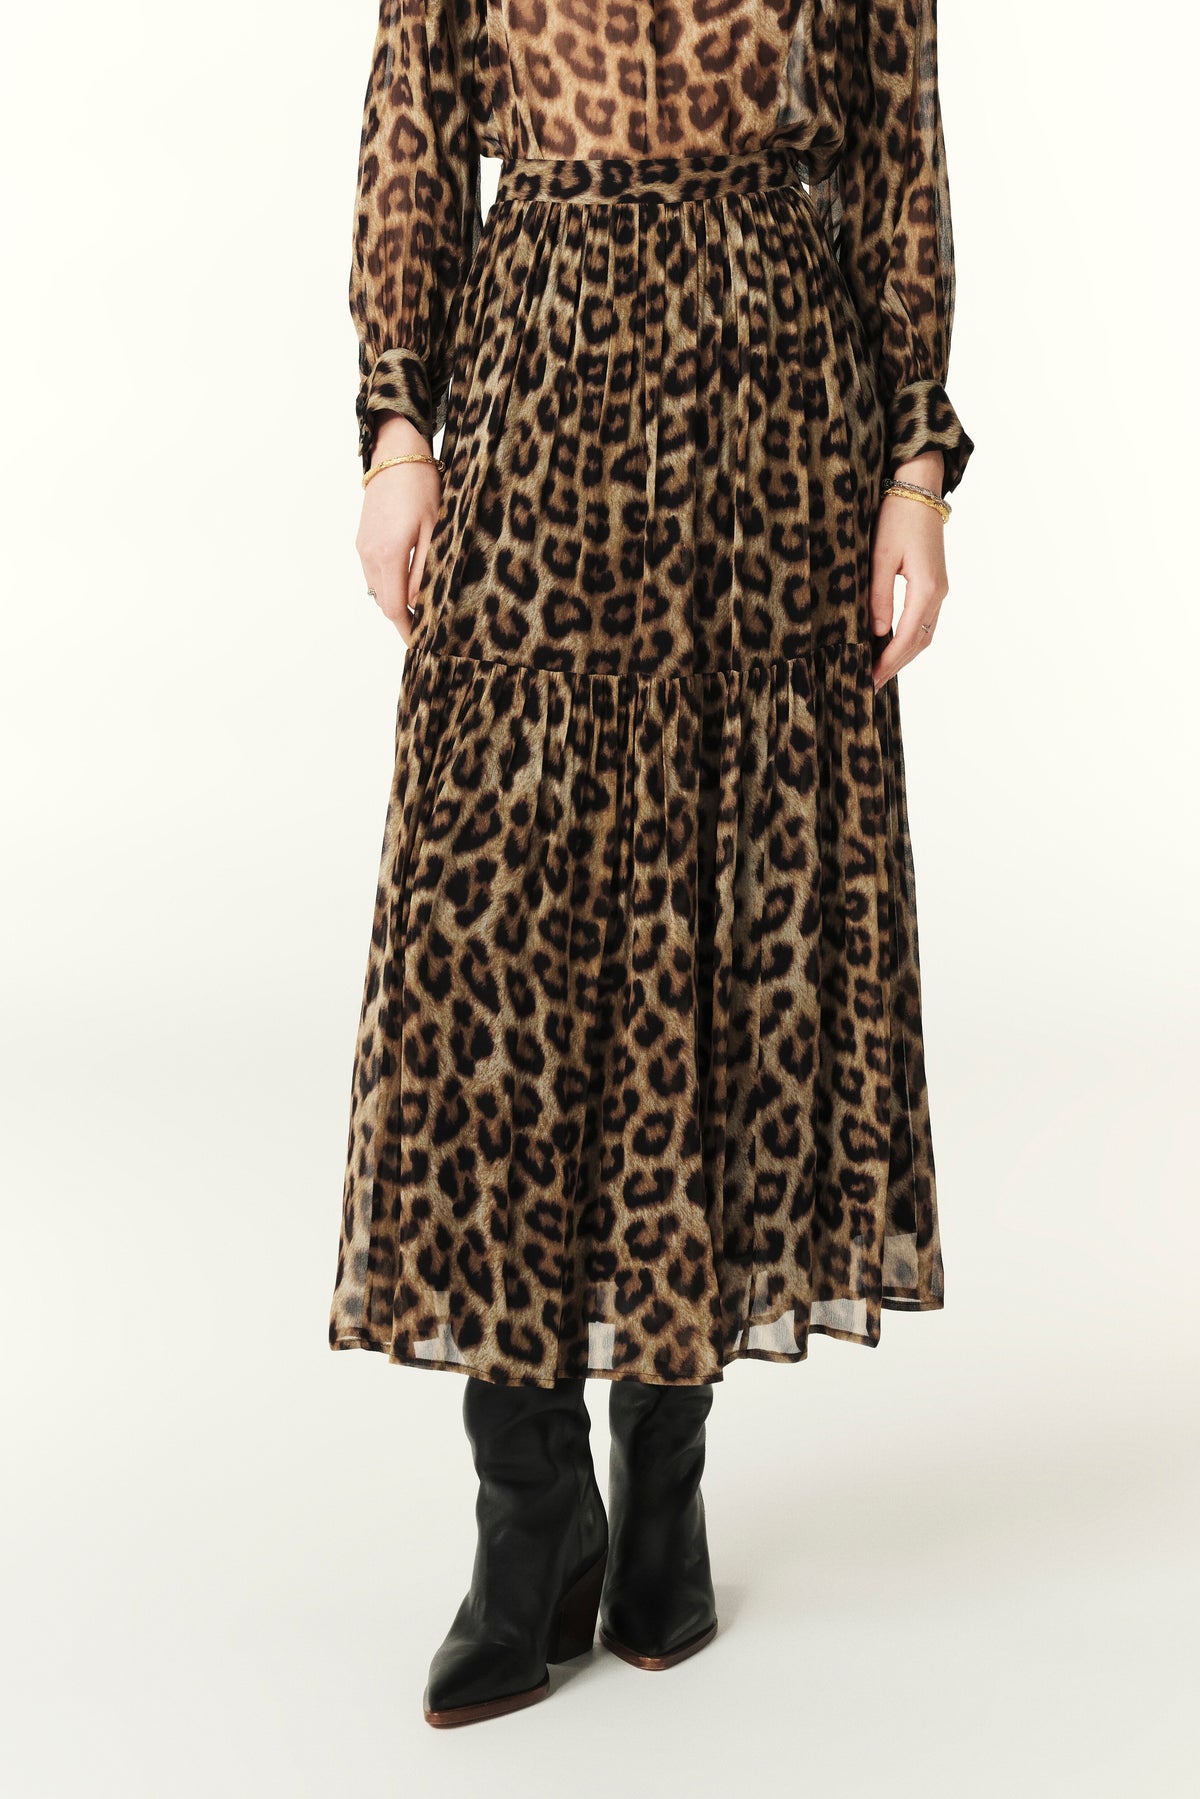 Maxi animal print floaty skirt with double tier